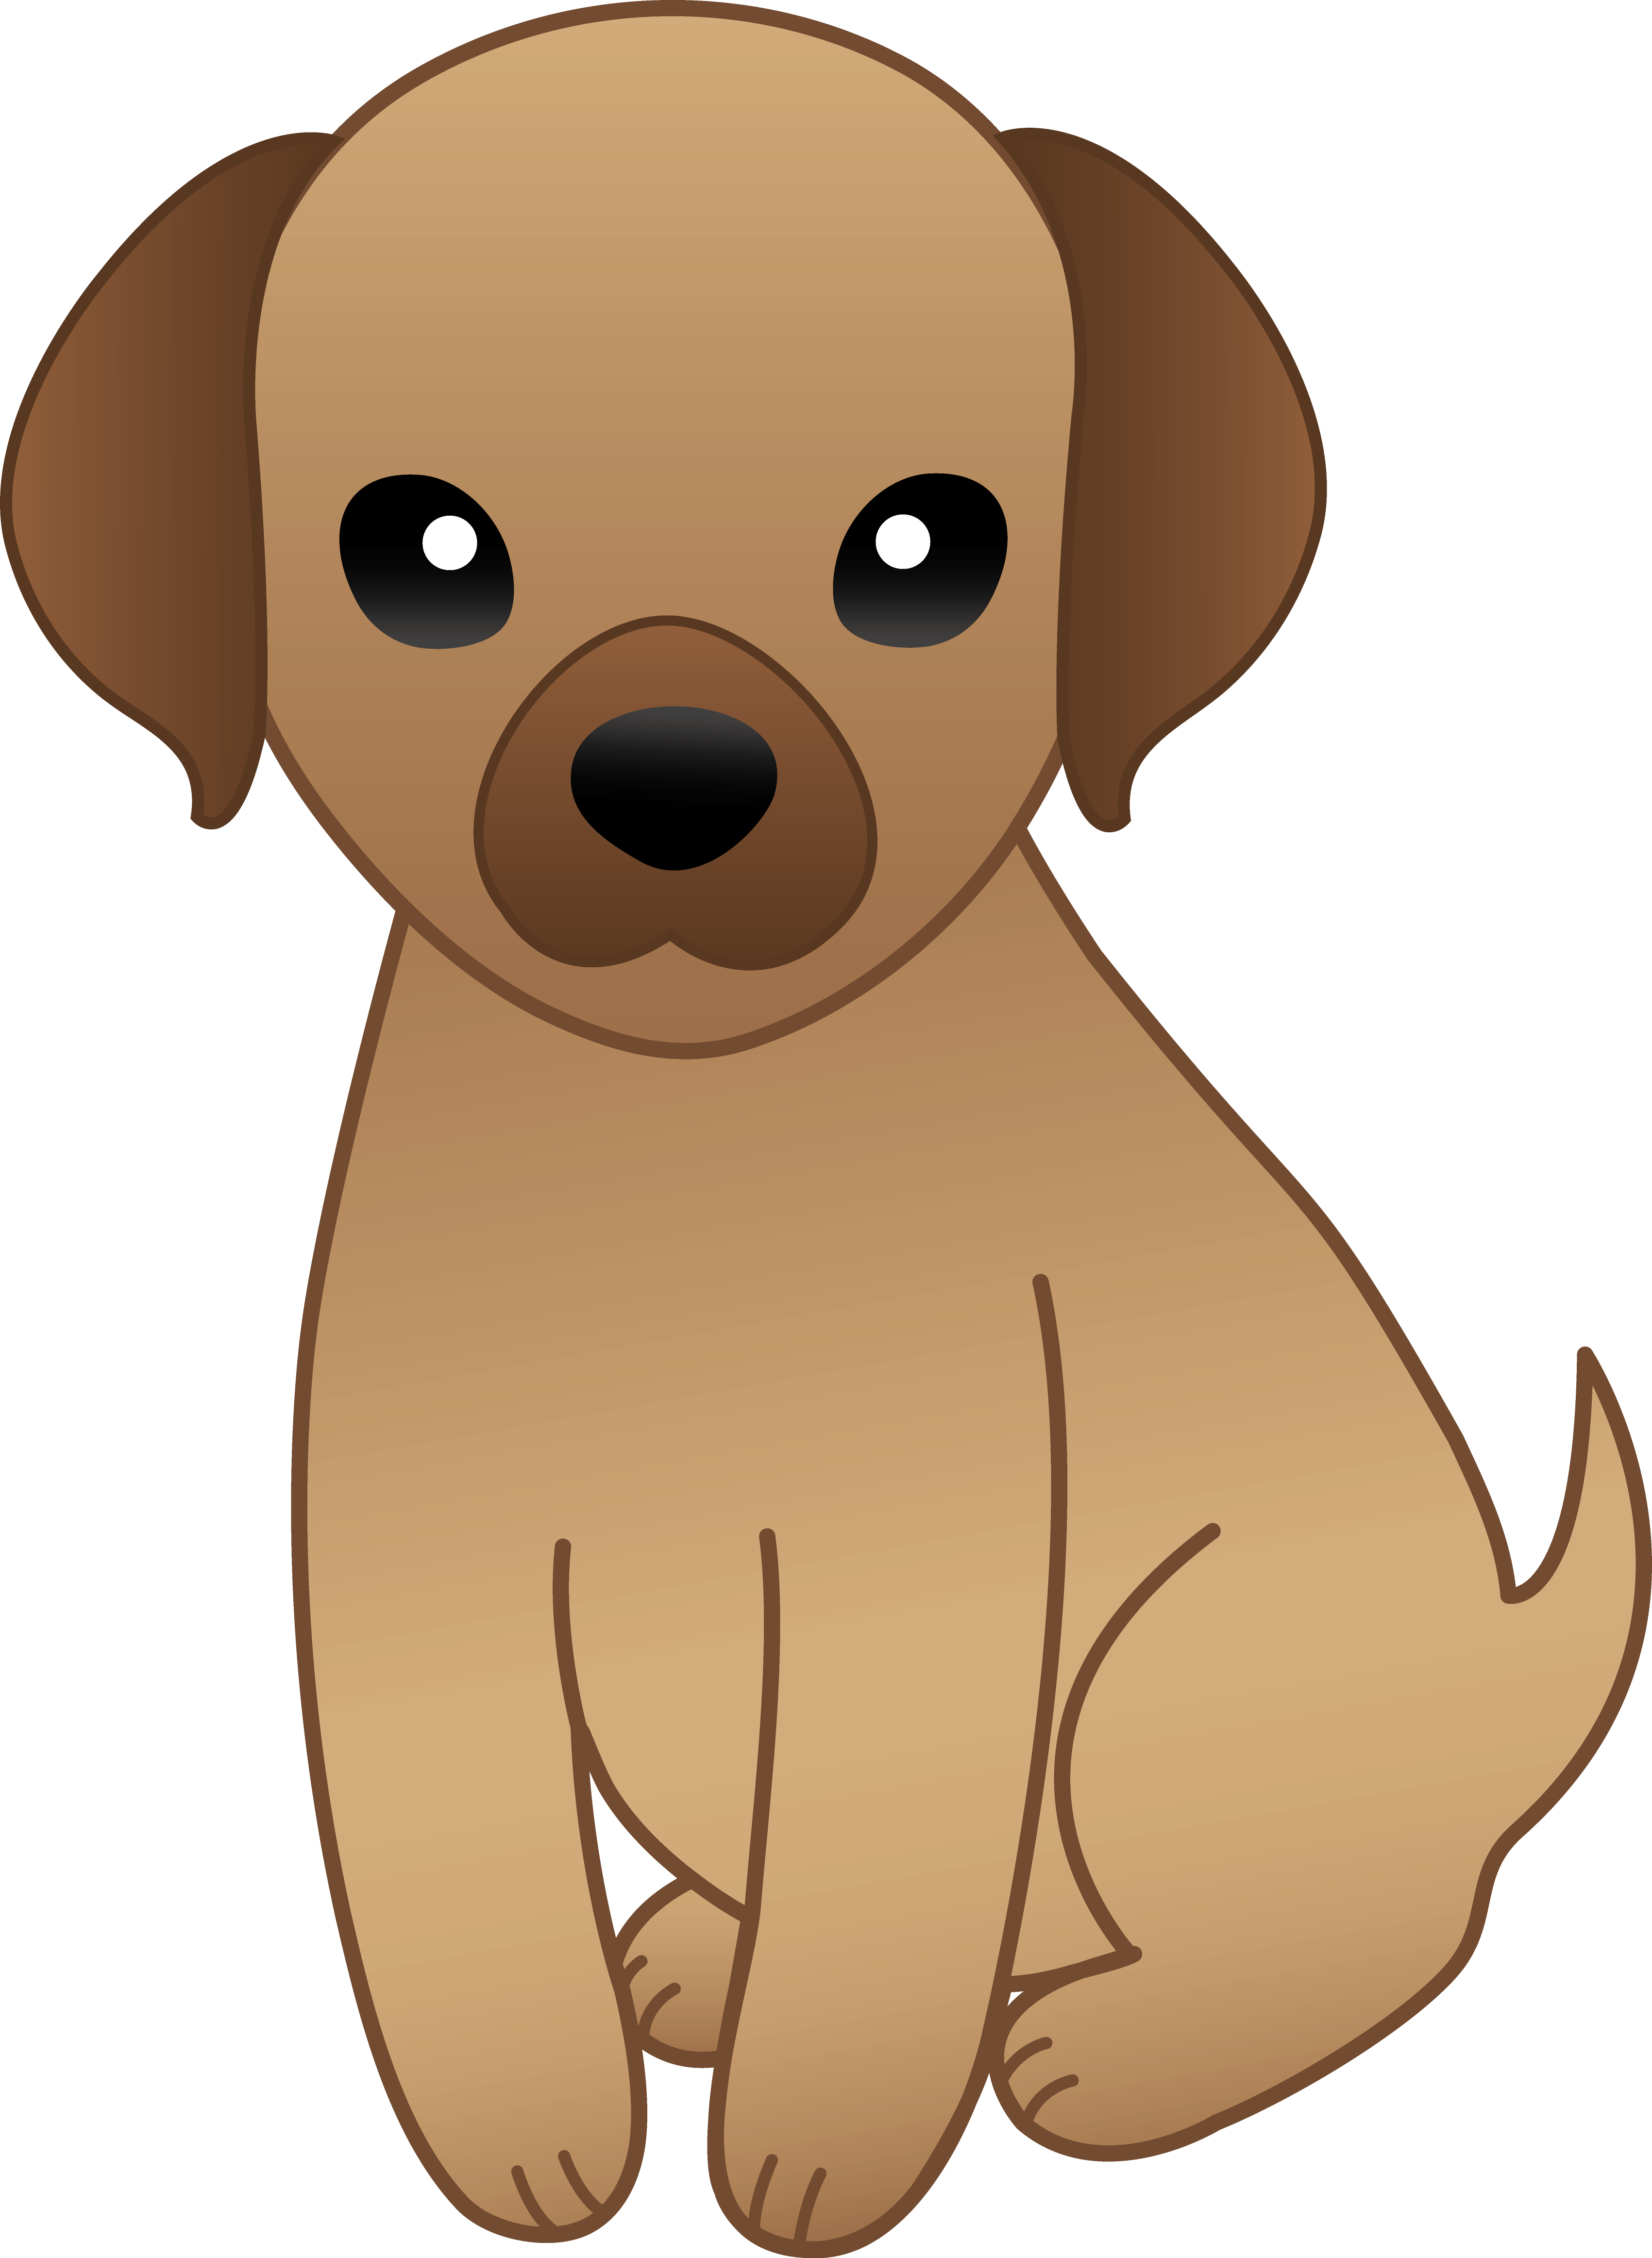 Free download Free Cute Animated Dog Download Free Clip Art Free ...